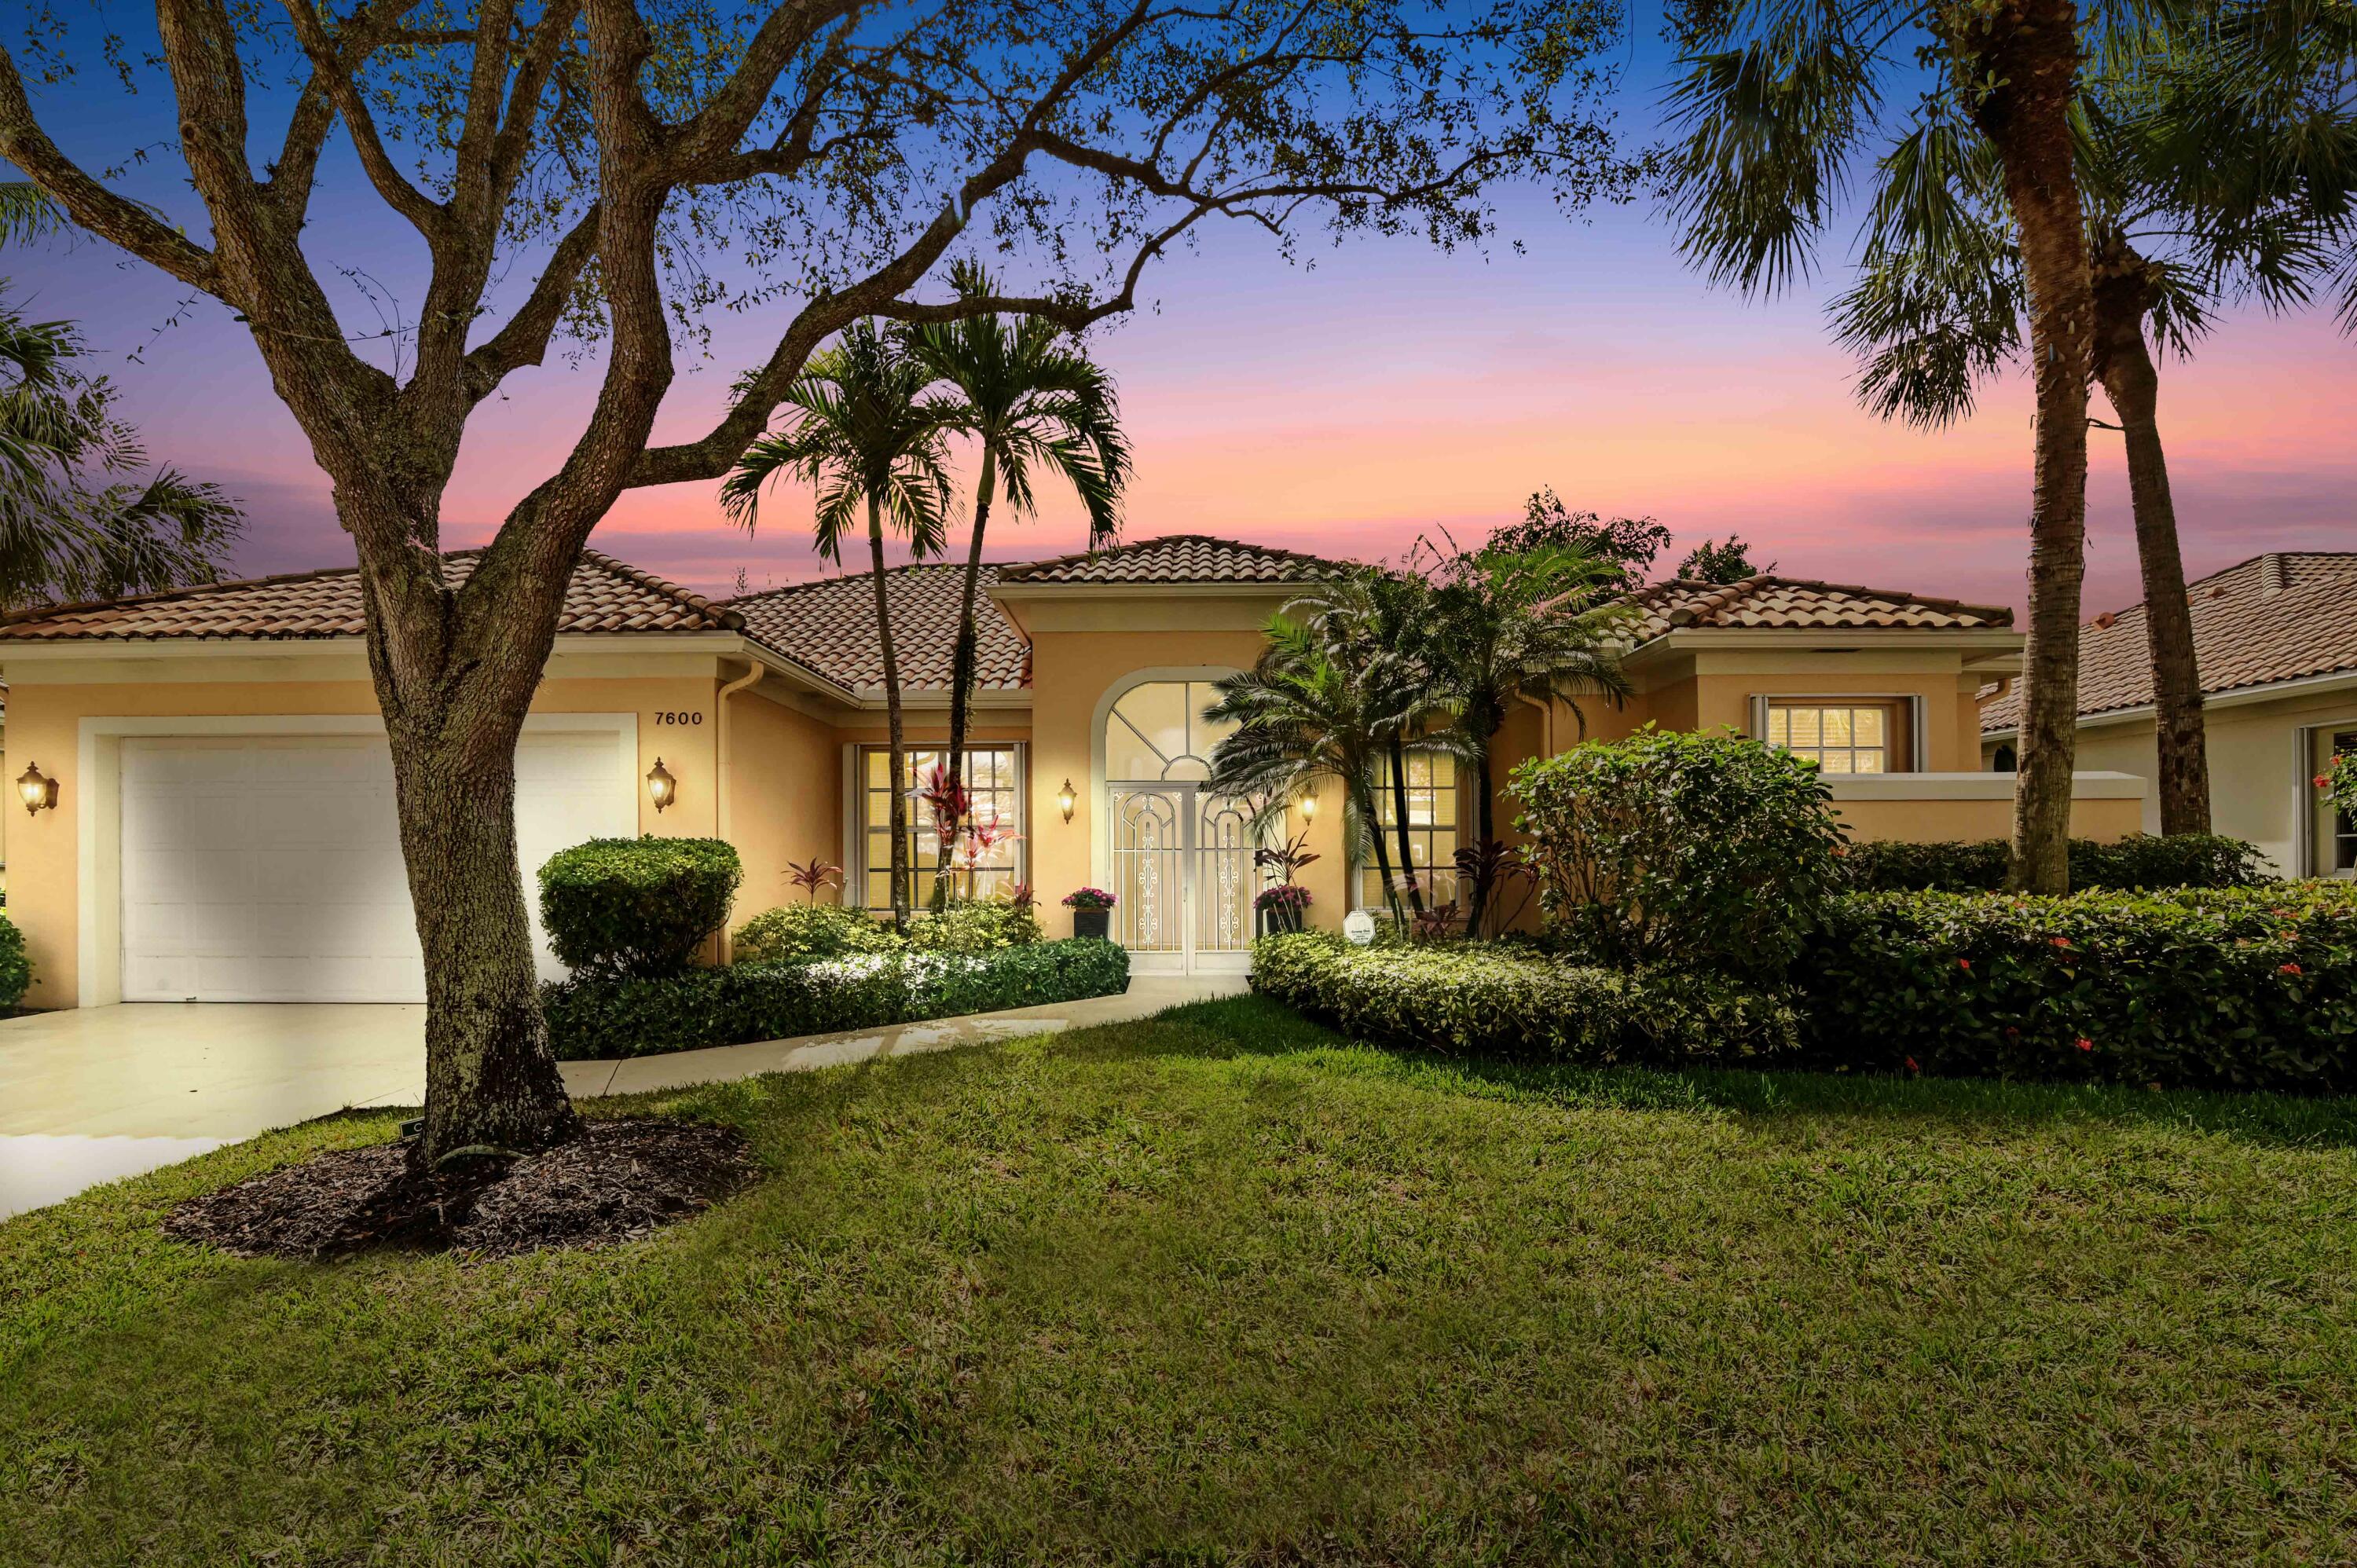 7600 Red River Road, West Palm Beach, Palm Beach County, Florida - 4 Bedrooms  
3 Bathrooms - 